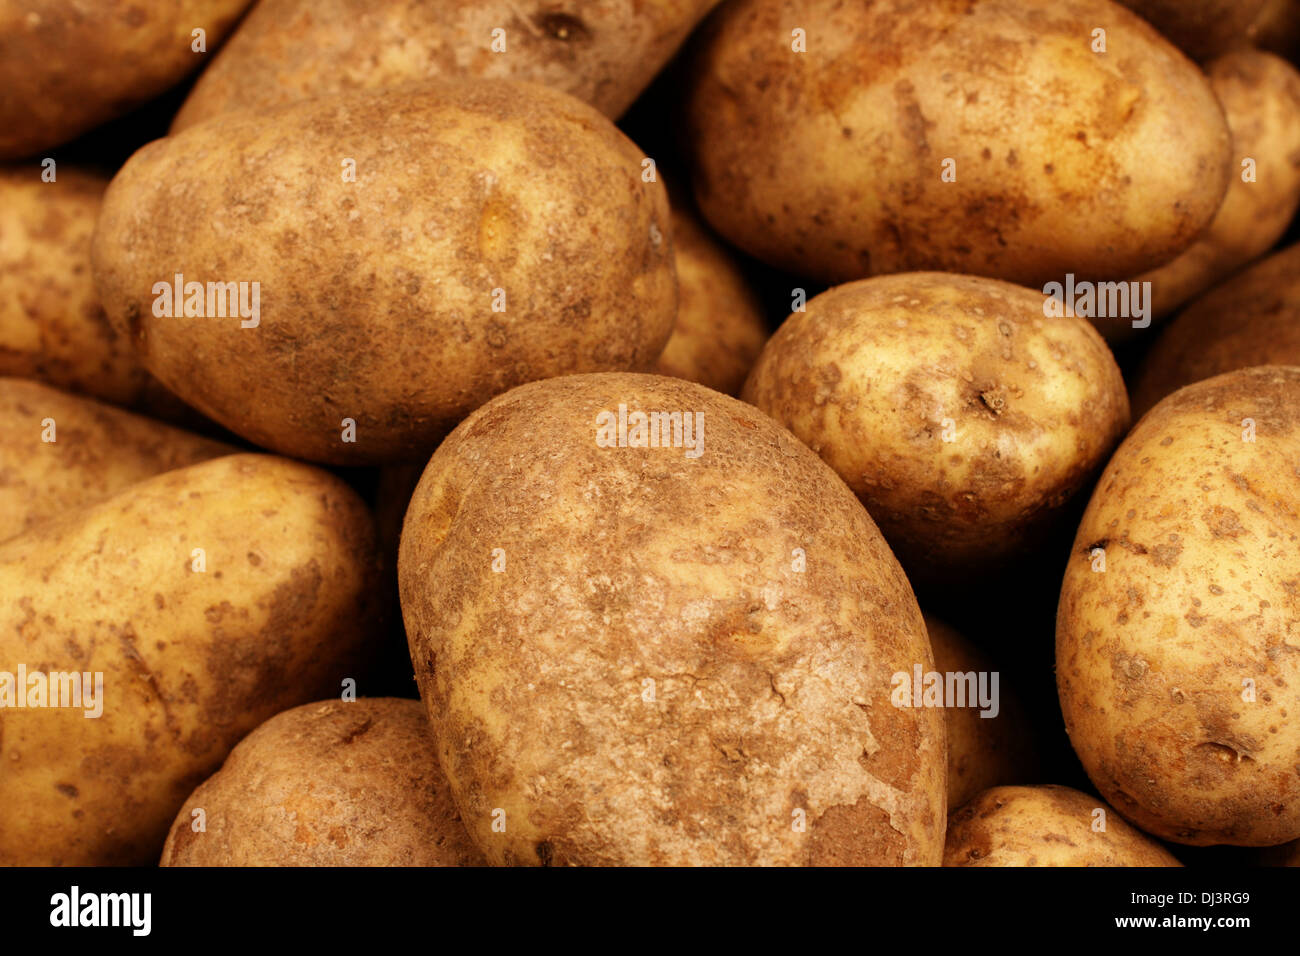 Russet Brown Skin High Resolution Stock Photography and Images - Alamy